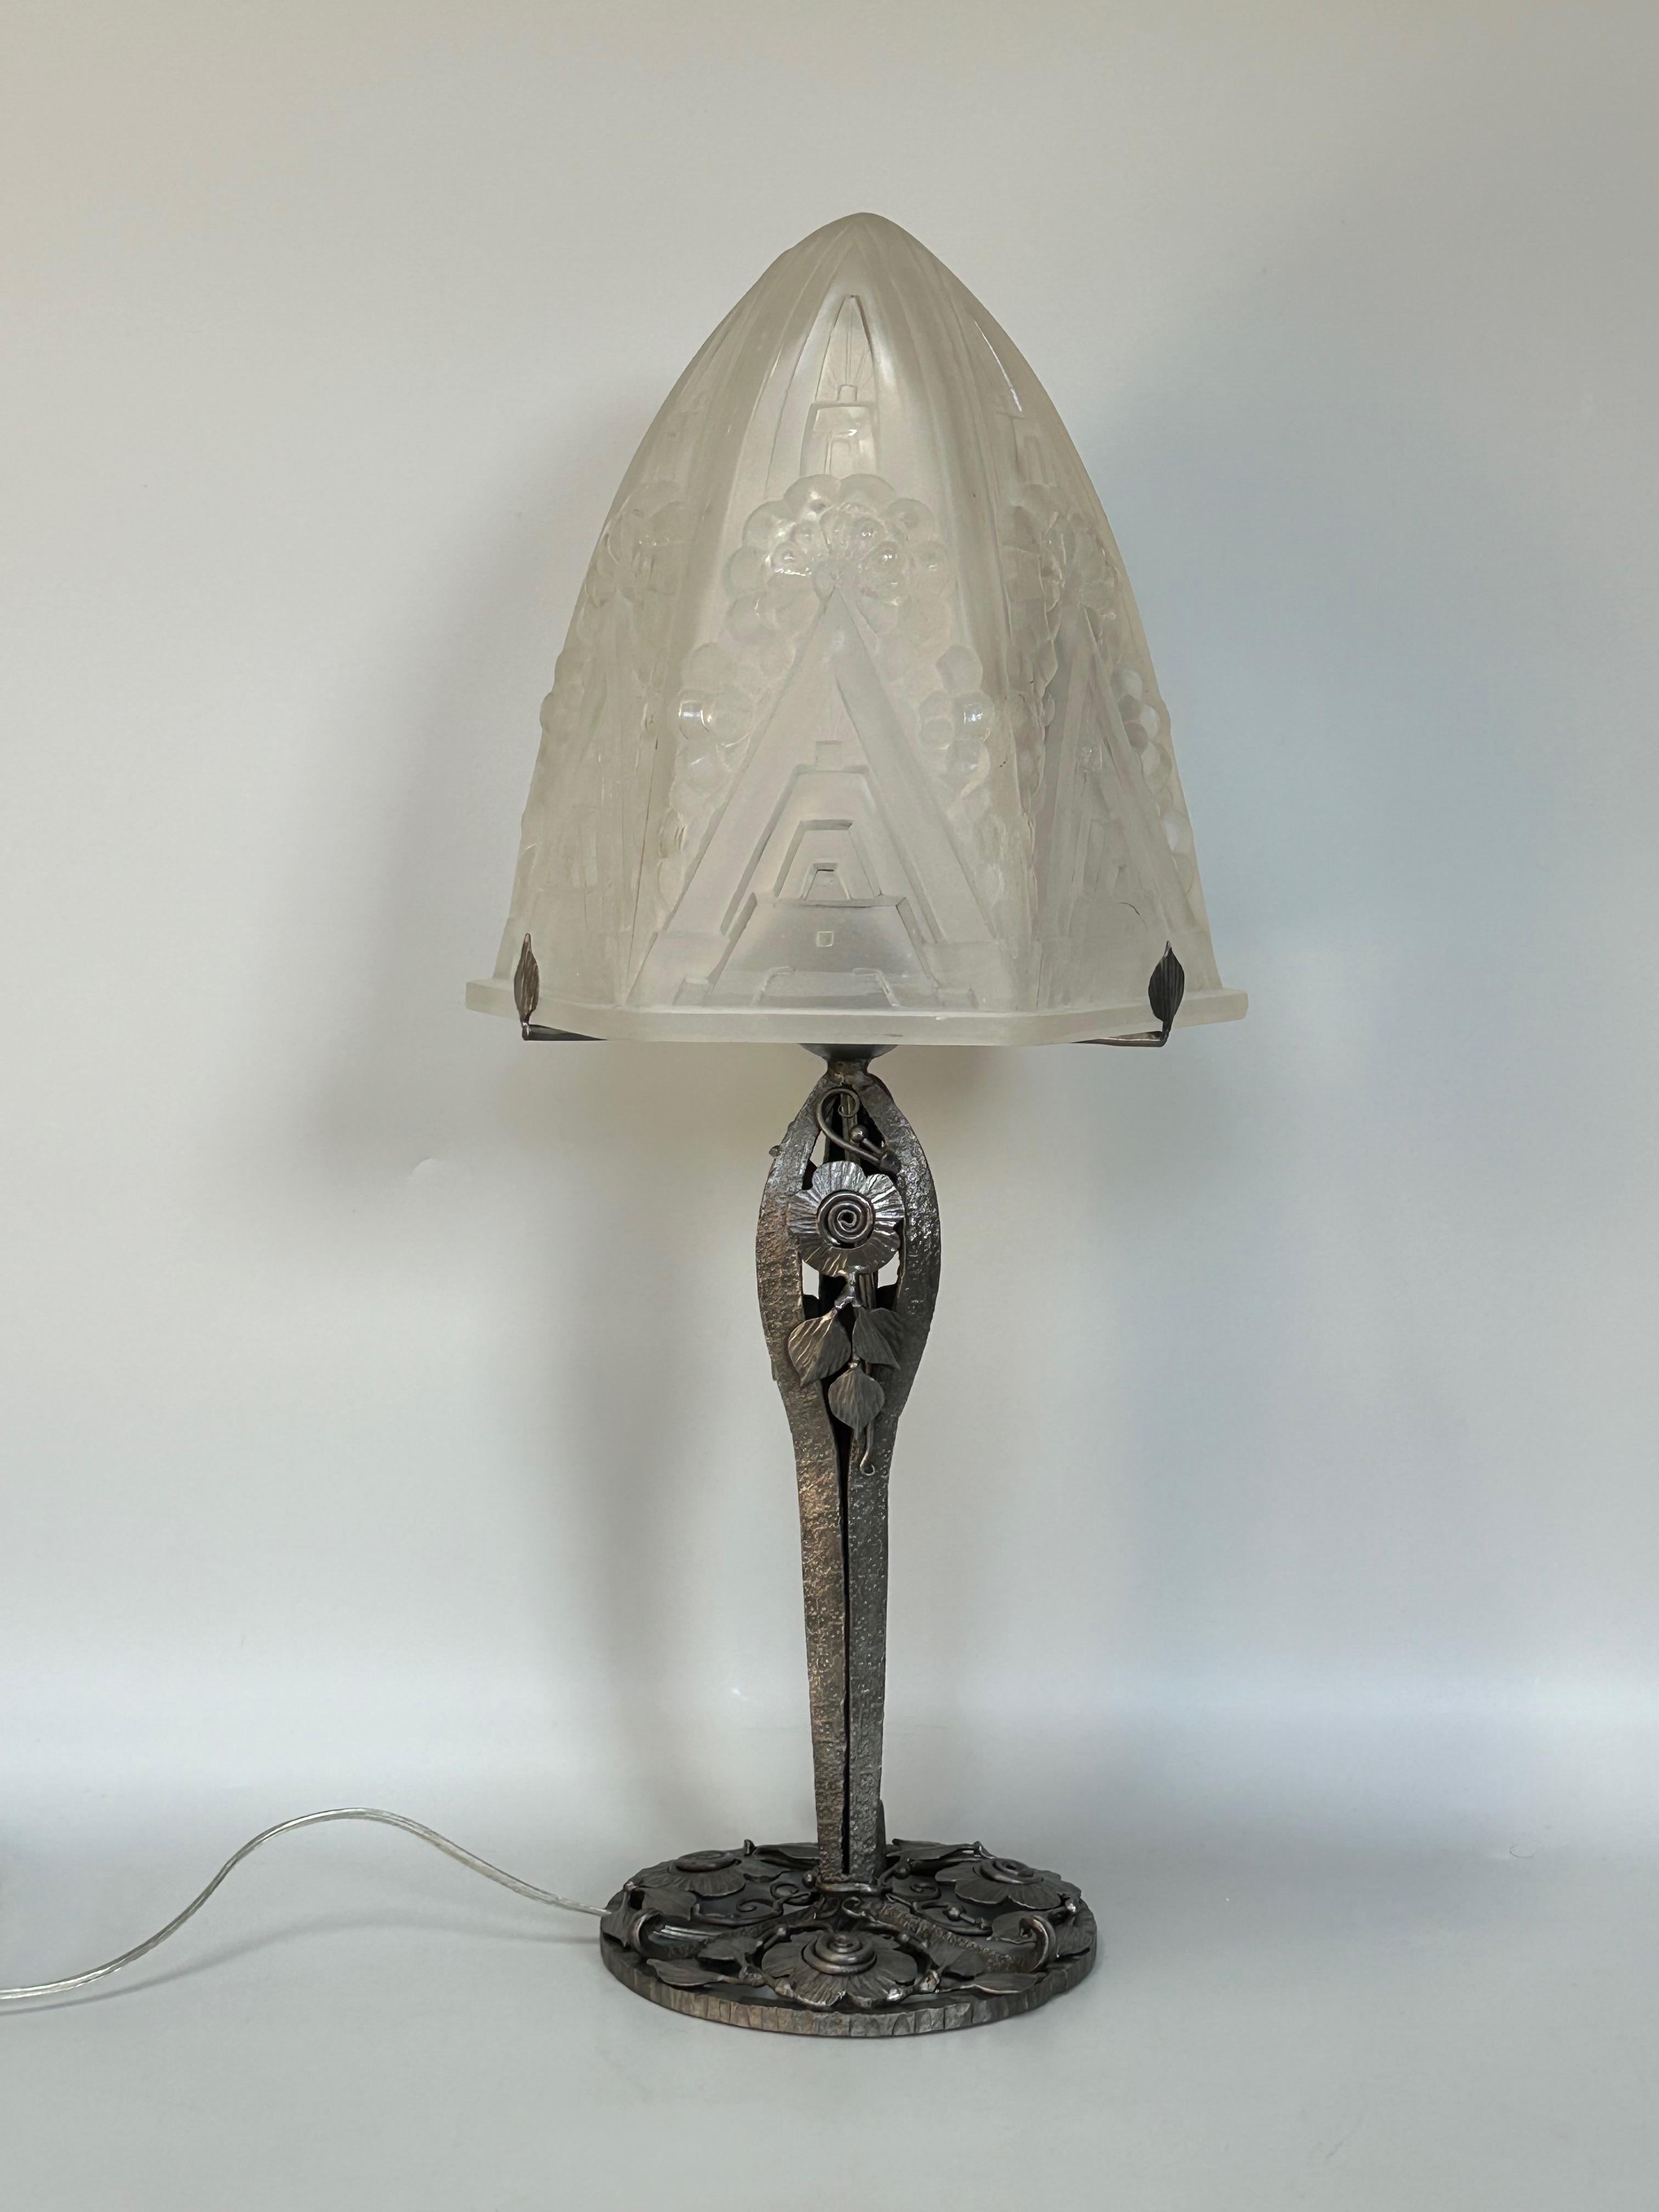 Henri Mouynet Art Deco Lamp

Art deco lamp circa 1930.
Nickel-plated wrought iron foot with floral decoration.
Molded glass shell, geometric and floral decoration.
Attributed to Henry Mouynet.
Electrified and in perfect condition.

Total height: